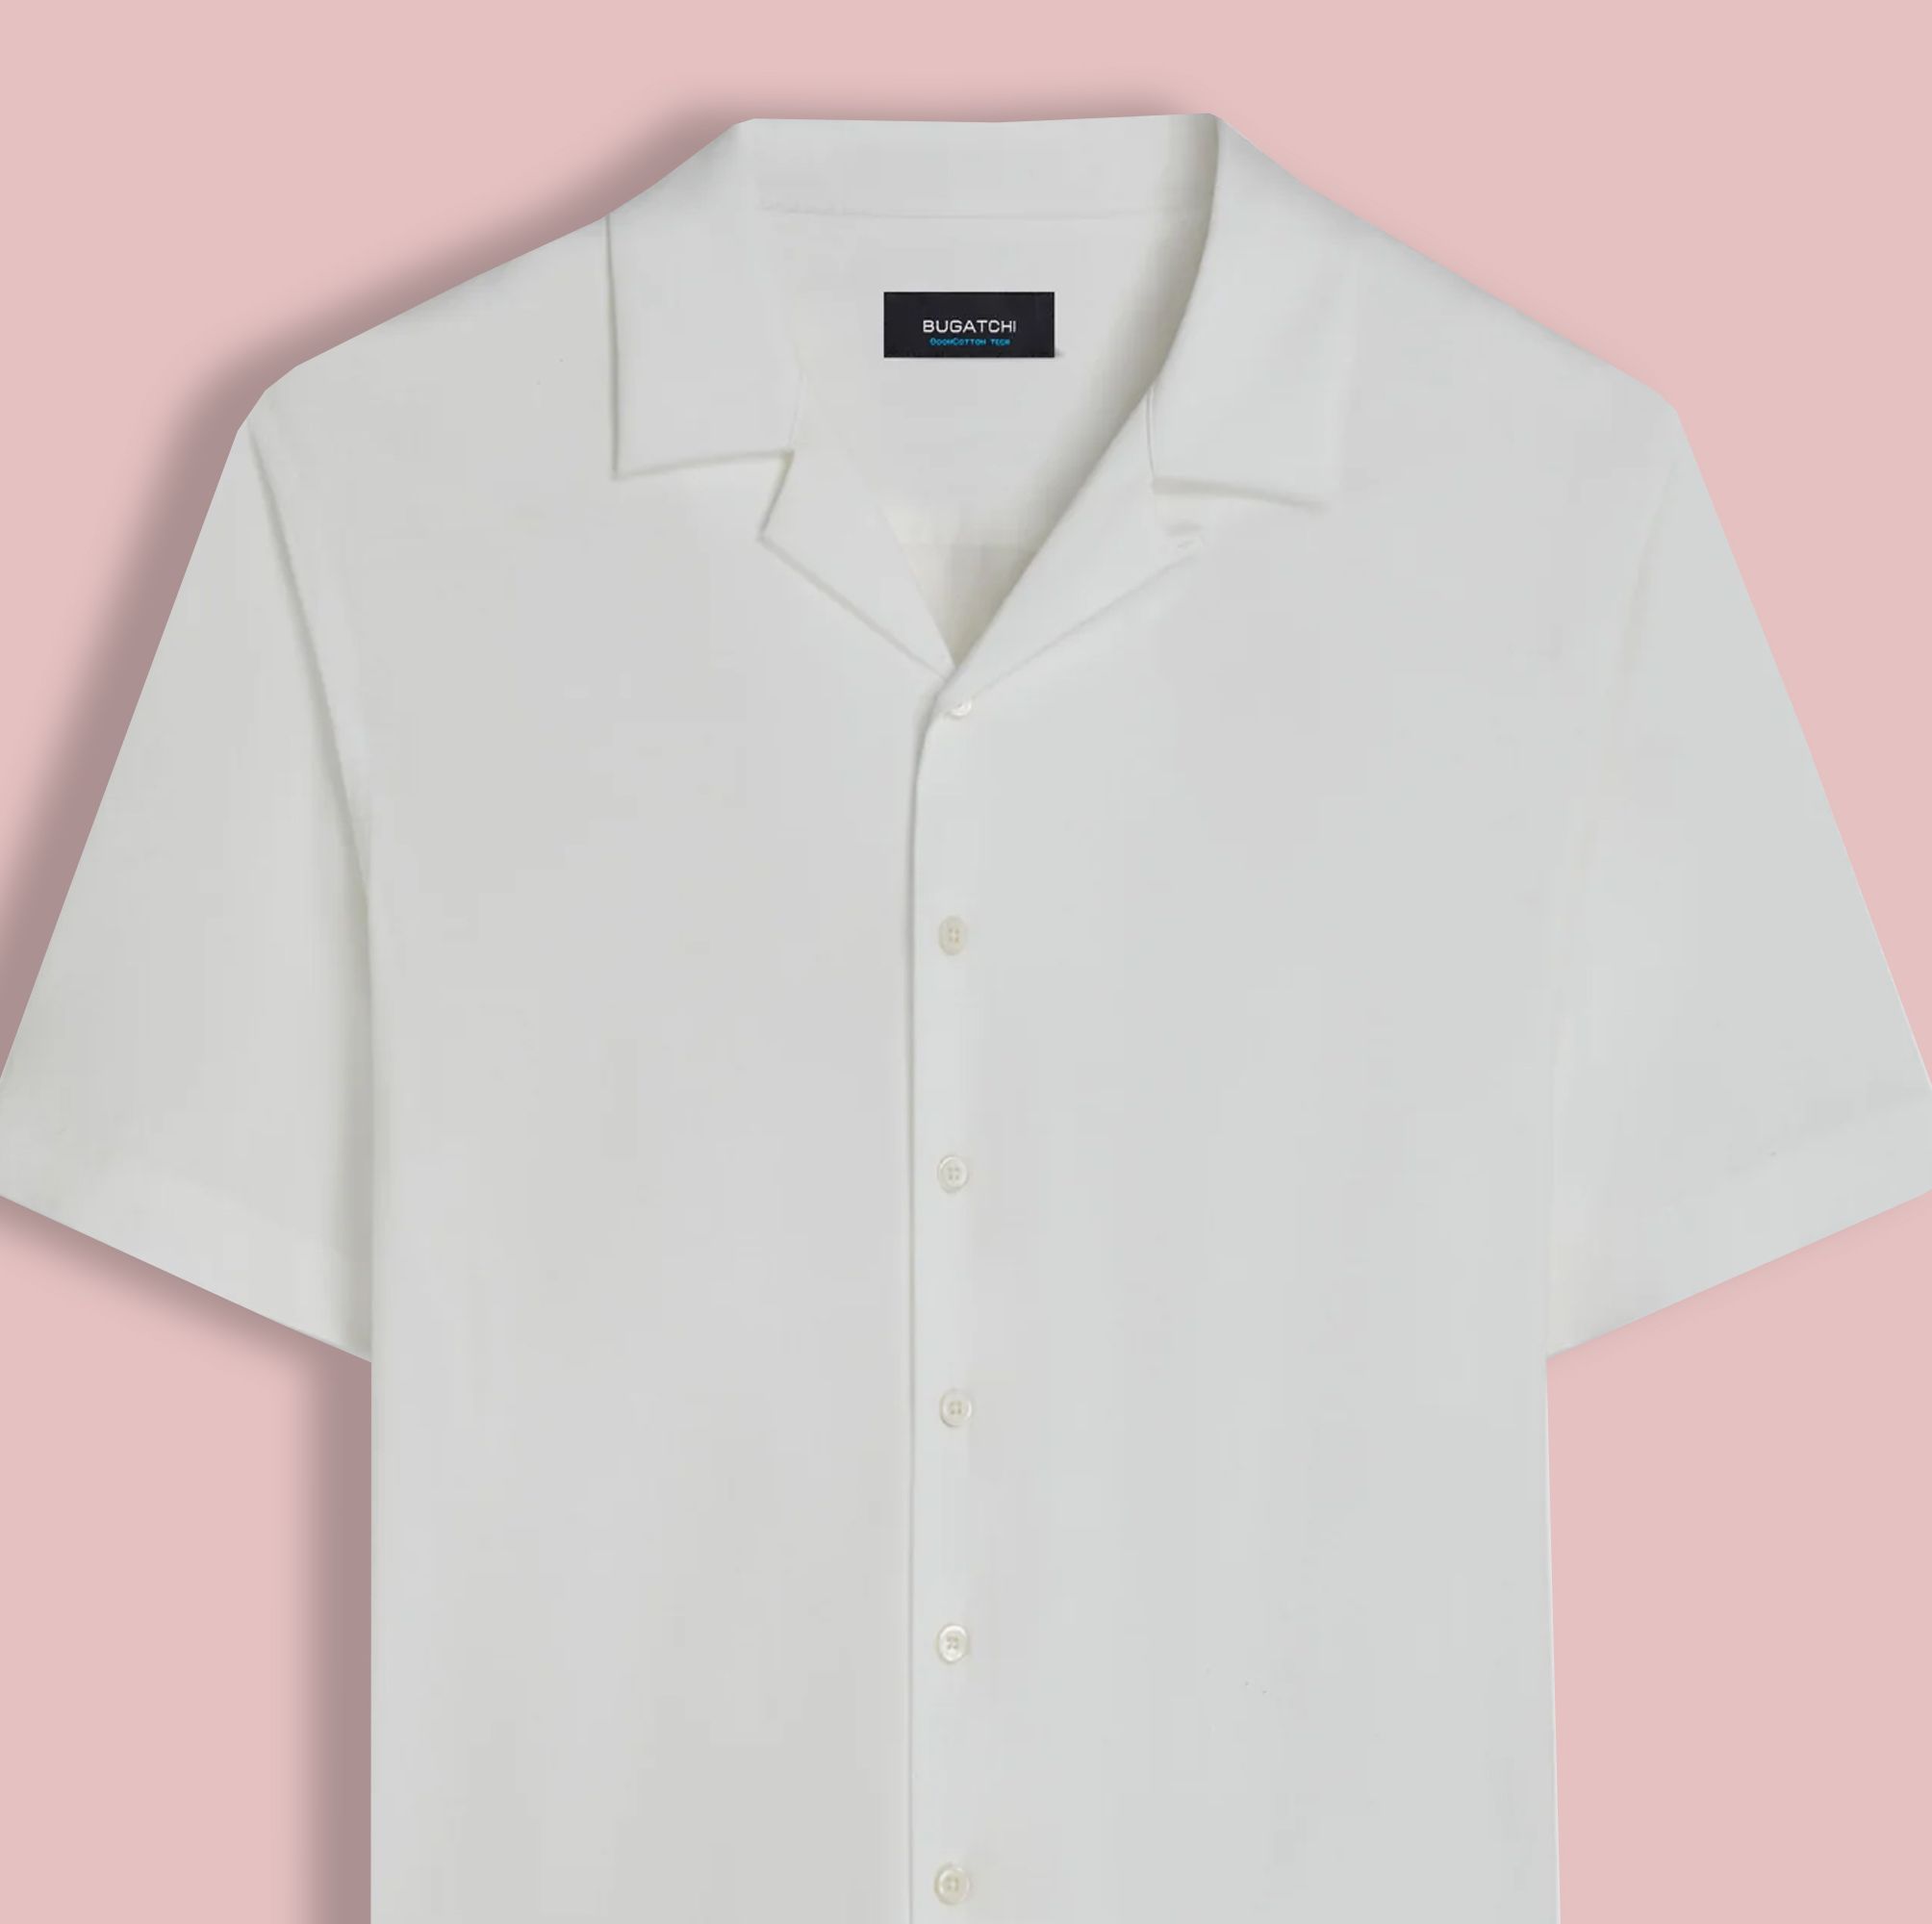 15 Cuban Collar Shirts To Keep You Cool All Summer Long (In More Ways Than One)